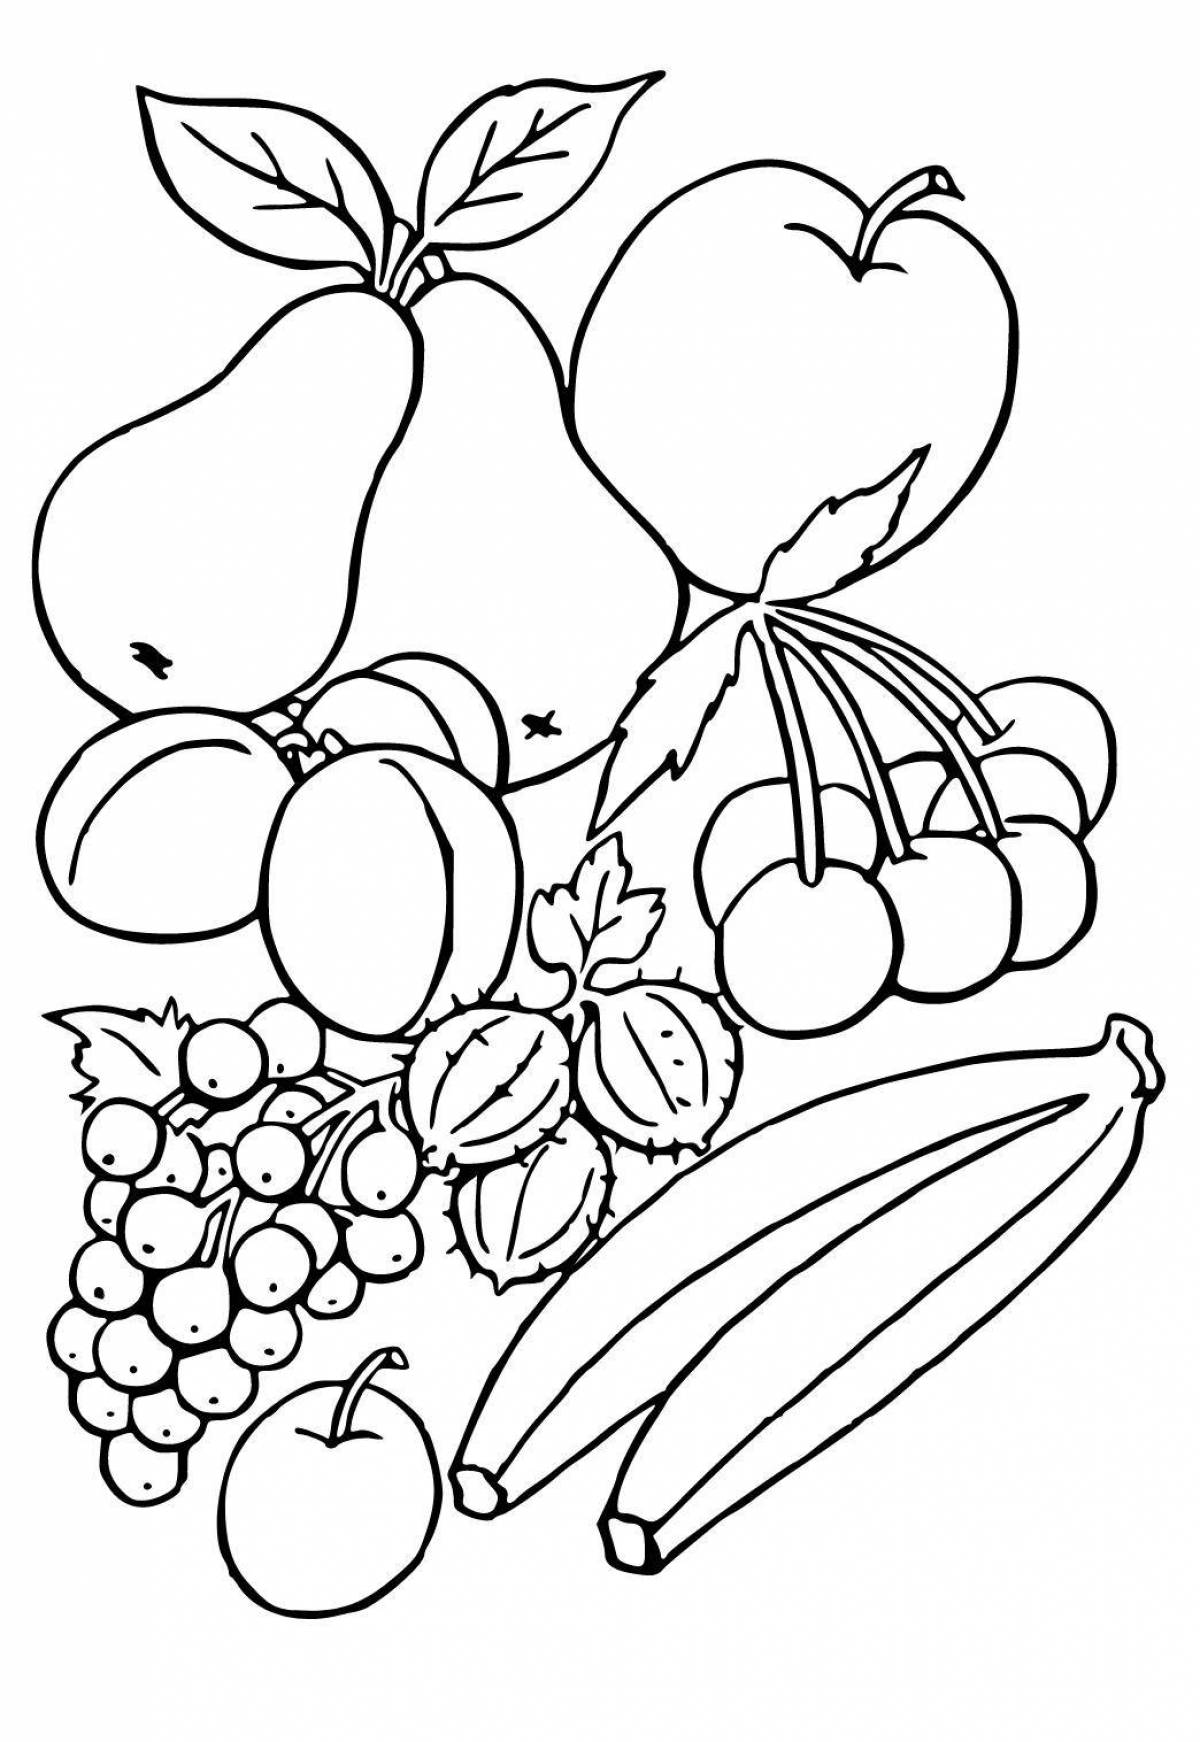 Glorious Roma compote coloring page